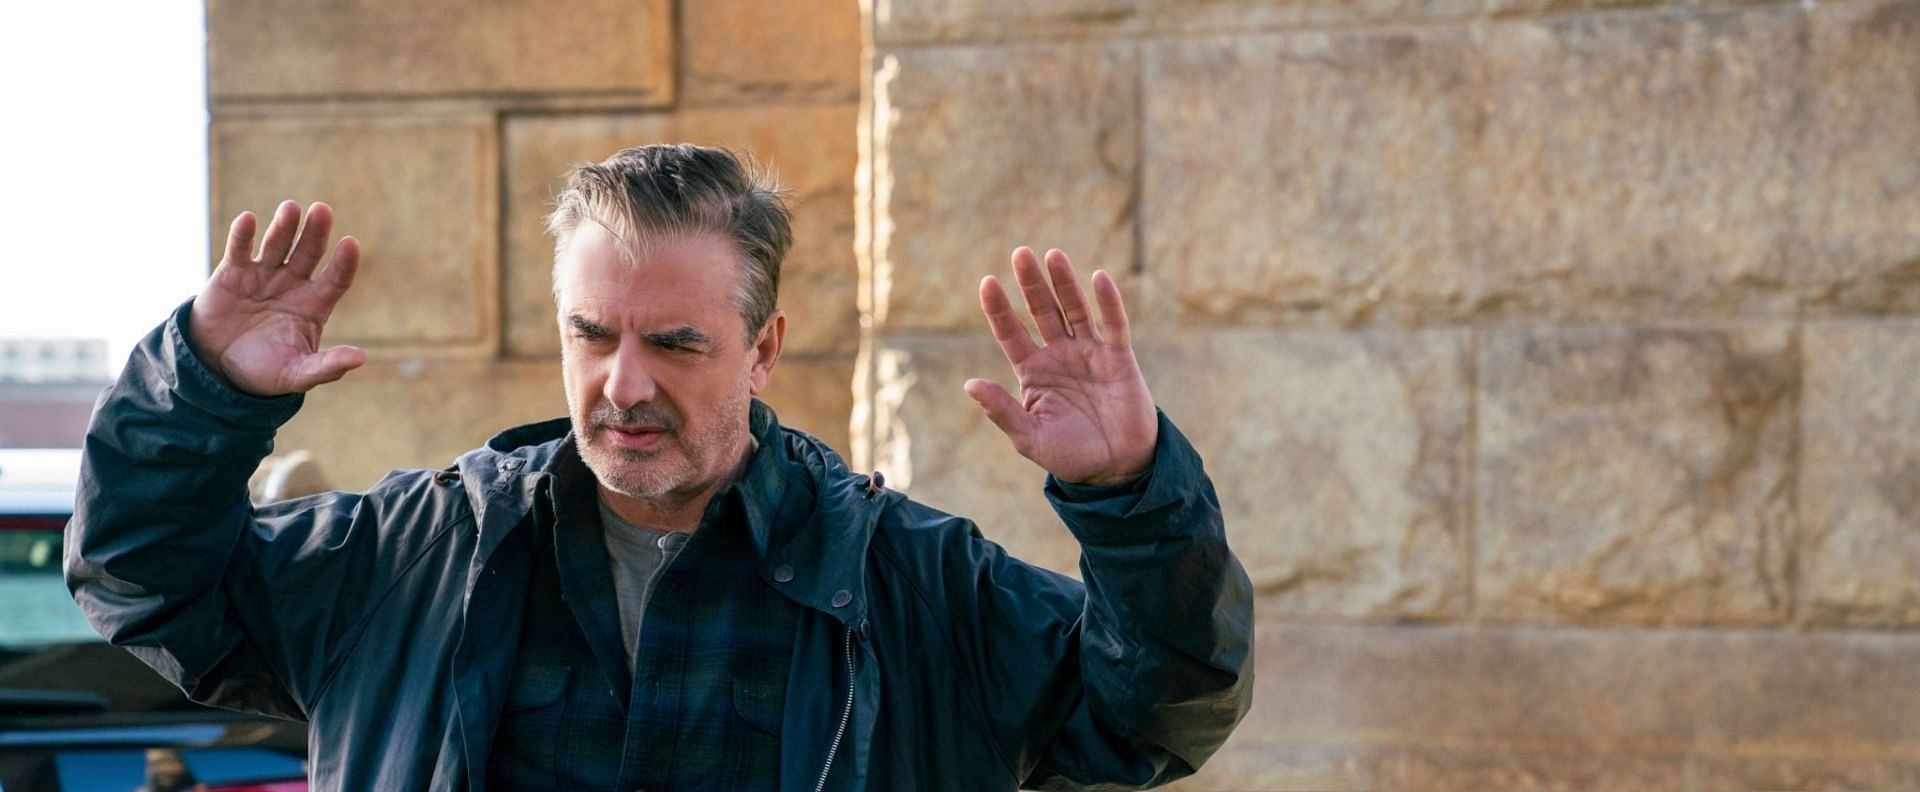 Chris Noth has been accused of allegedly assaulting two women in the past (Image via The Equalizer/CBS)